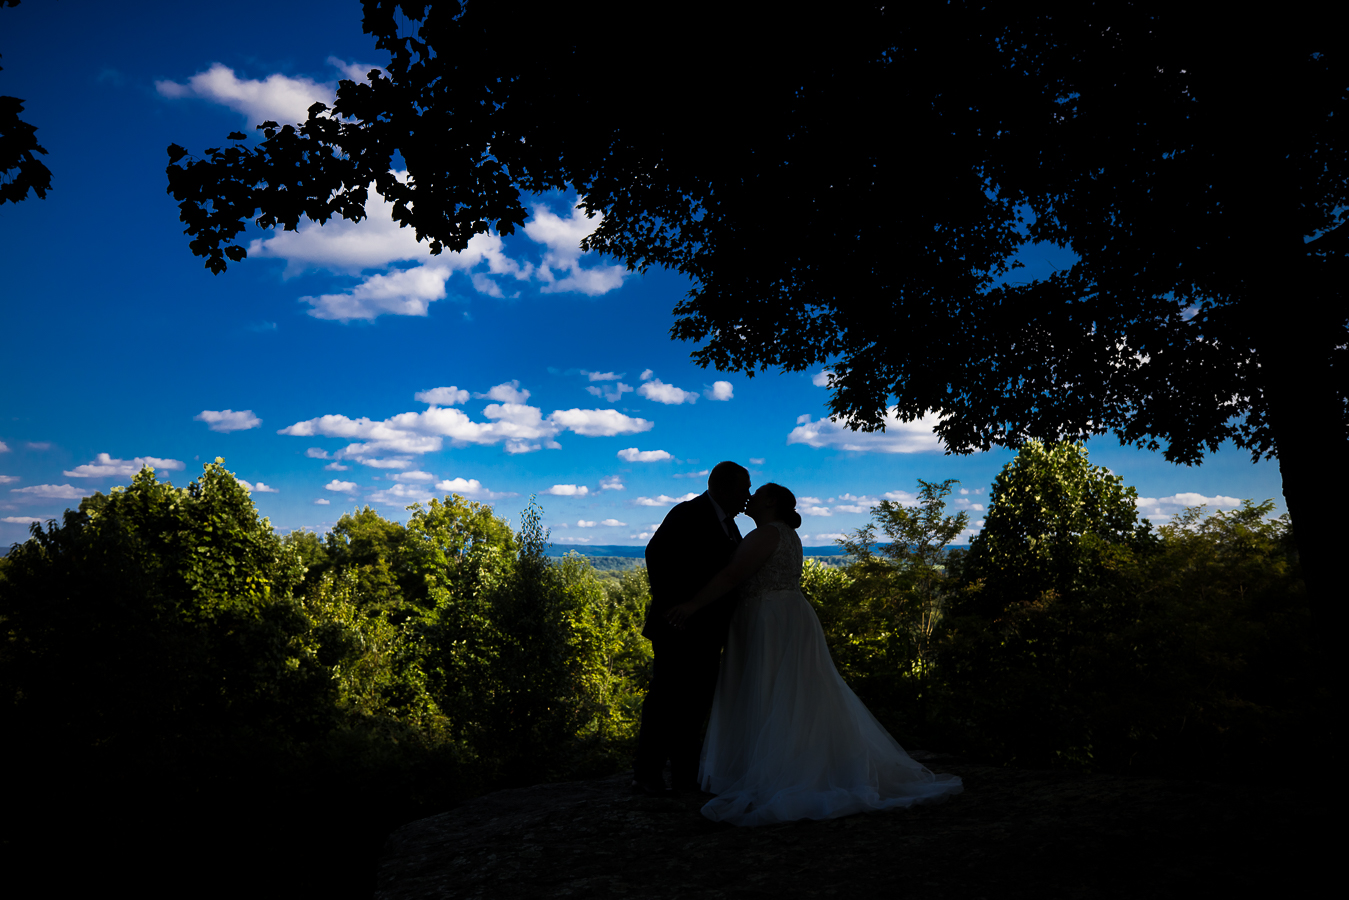 Oak Lodge Wedding Photographer, rhinehart photography, captures this vibrant image of the couple as they stand on a mountain overlook surrounded by trees and the vibrant blue sky during their outdoor wedding 